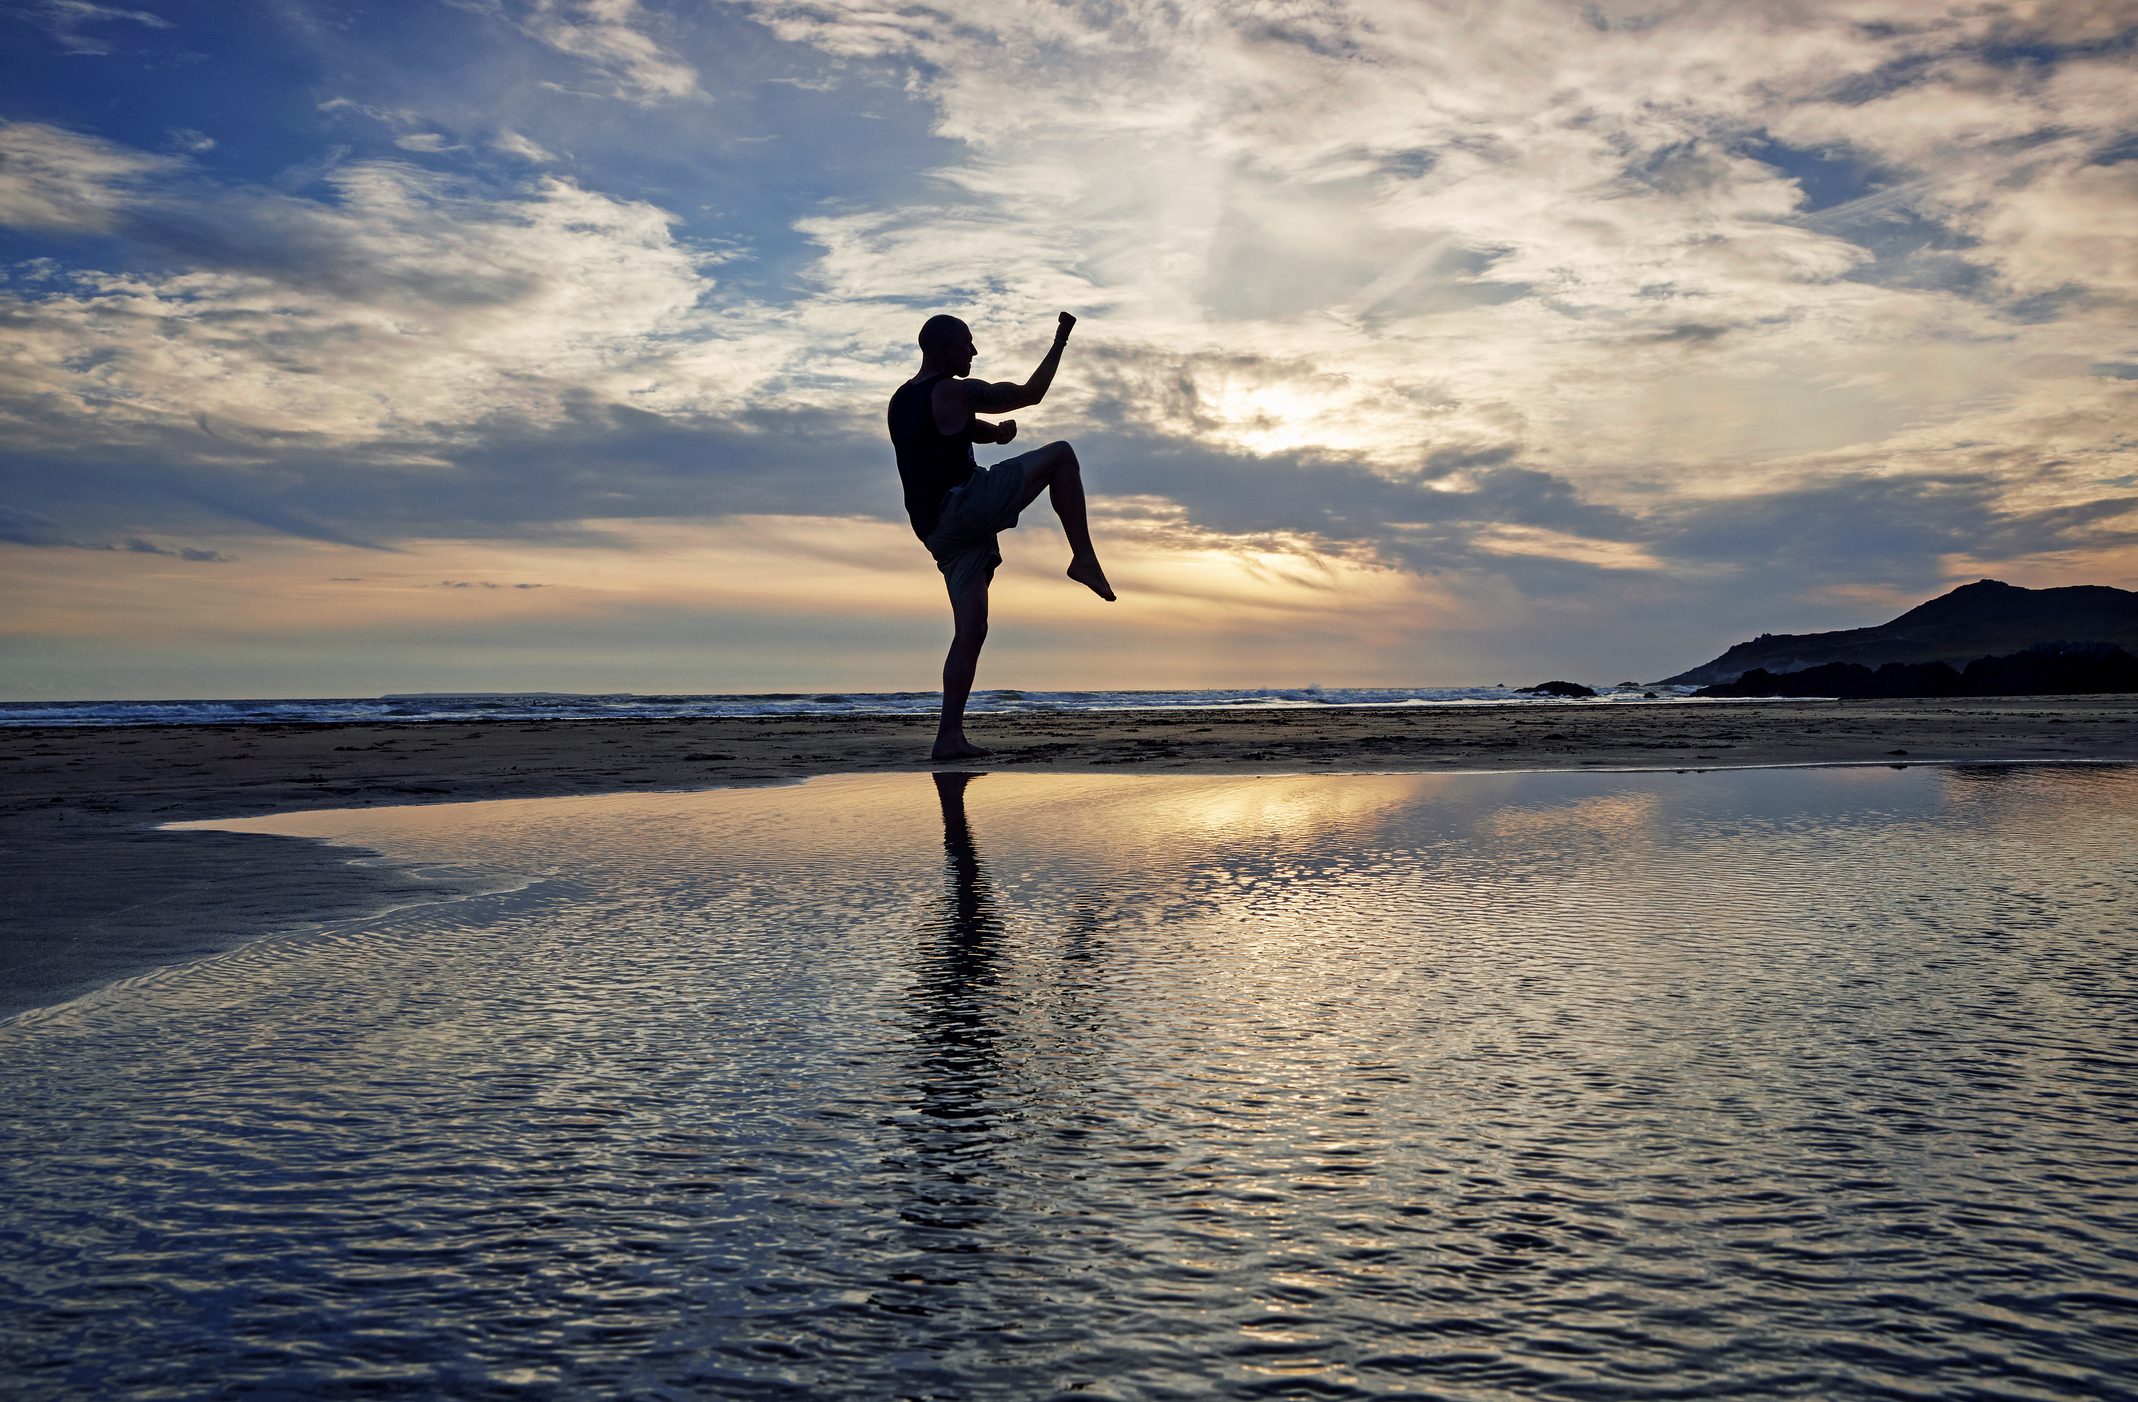 Silhouette of man practicing kung fu moves on beach at sunset.